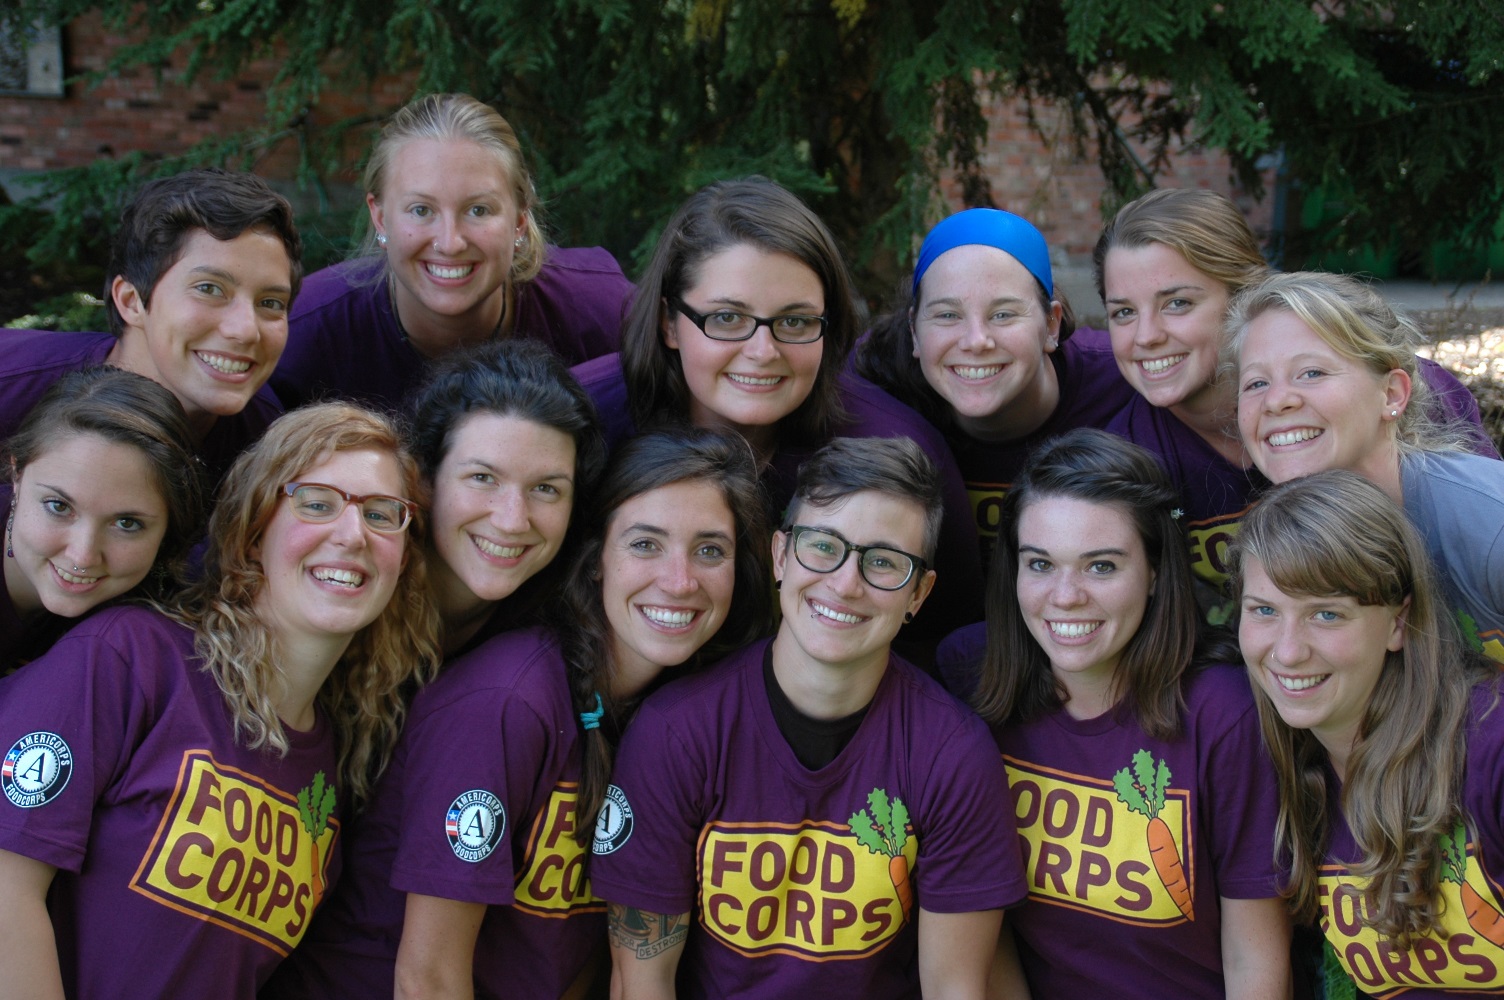 All 12 FoodCorps Members based in Connecticut descended upon Common Ground's Site on September 20th